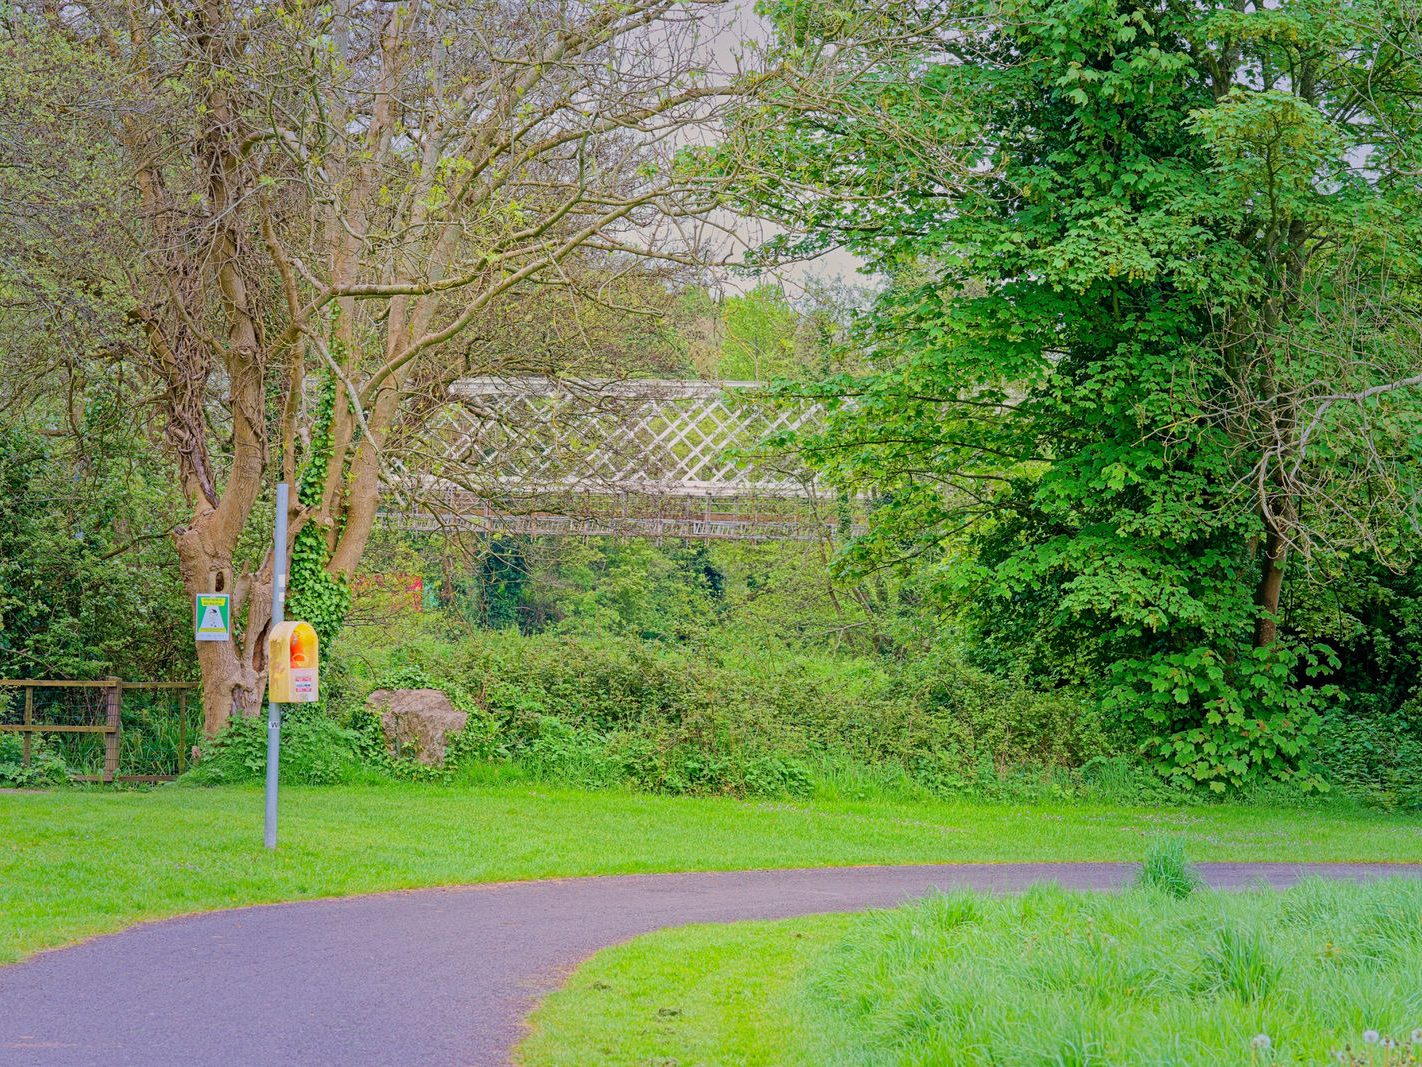 NEAR FARMLEIGH BRIDGE AND THE OLD HARRIS'S HOUSE [TWO DERELICT STRUCTURES AT WATERSTOWN PARK IN PALMERSTOWN]-232558-1